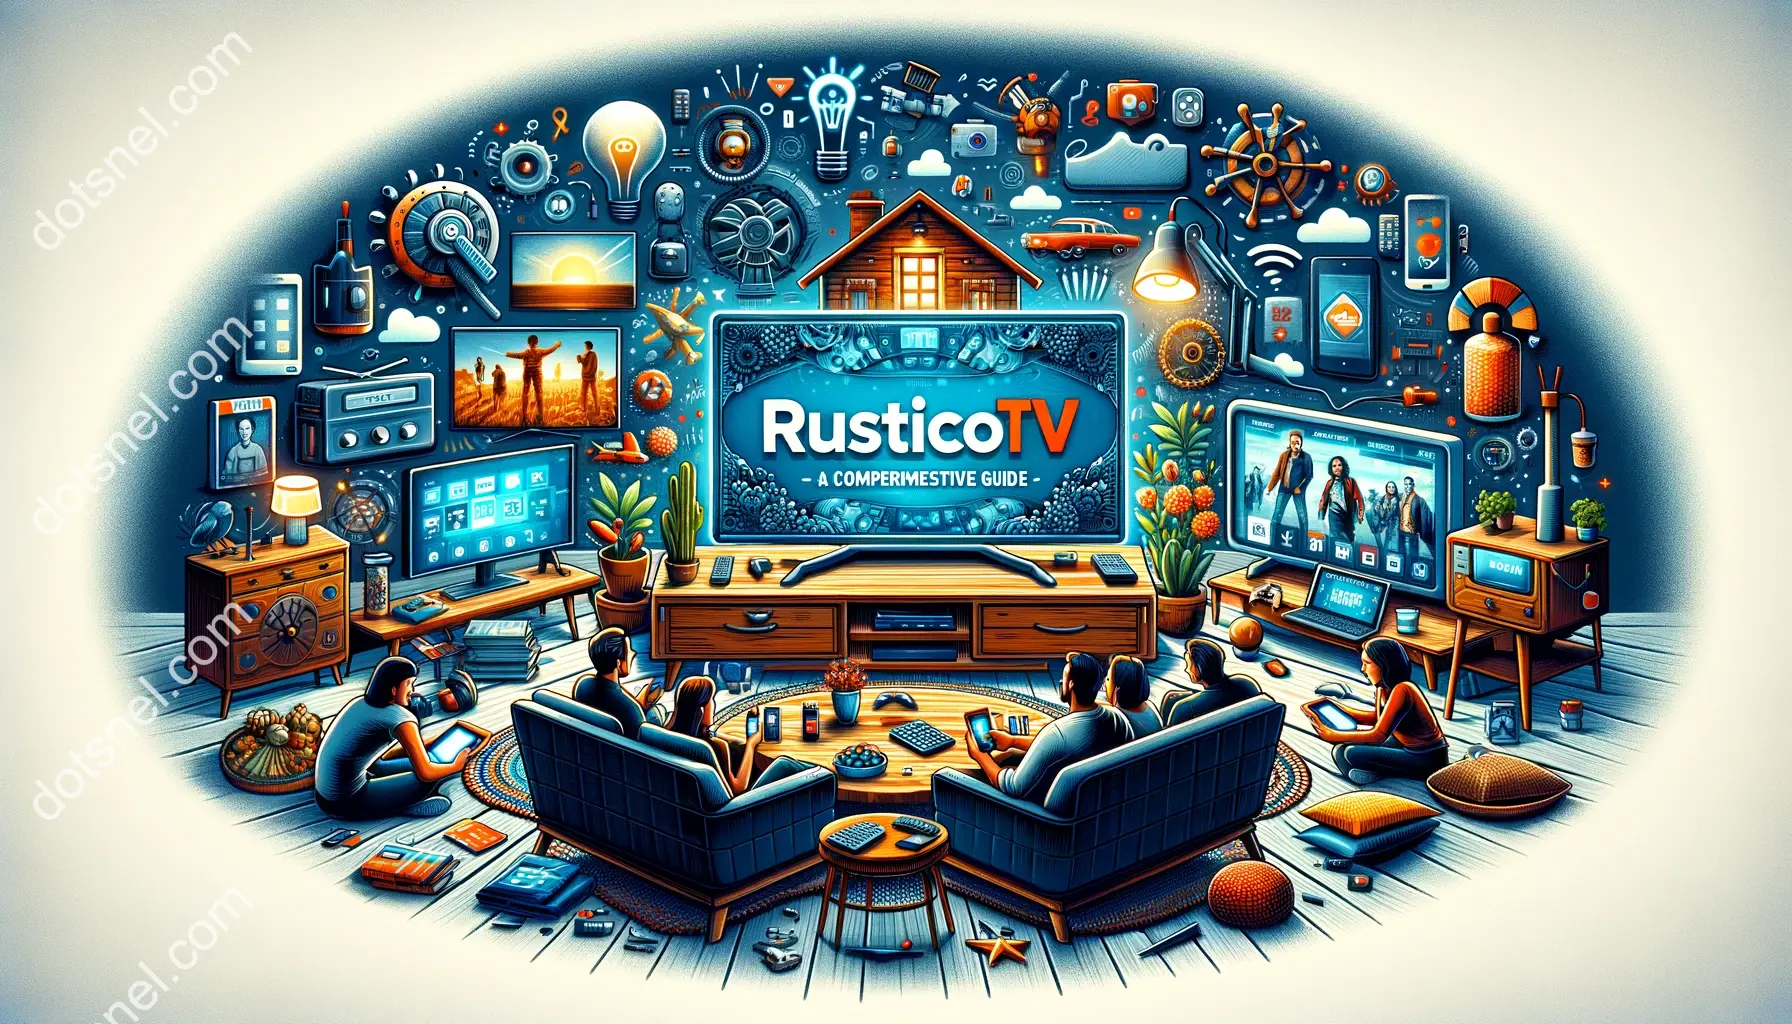 What is RusticoTV